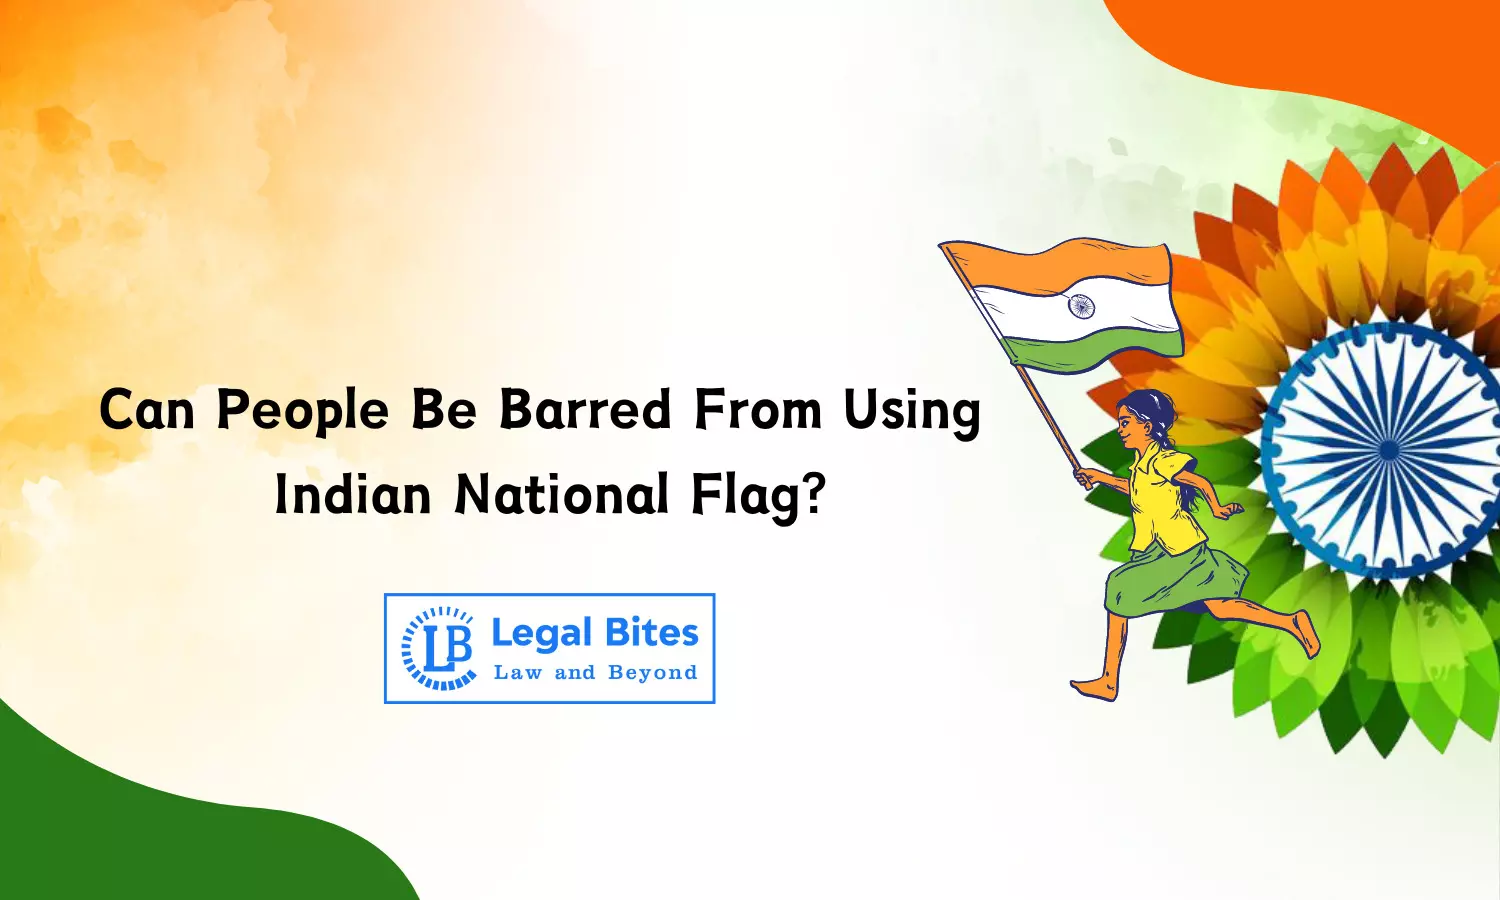 Can People Be Barred From Using Indian National Flag?